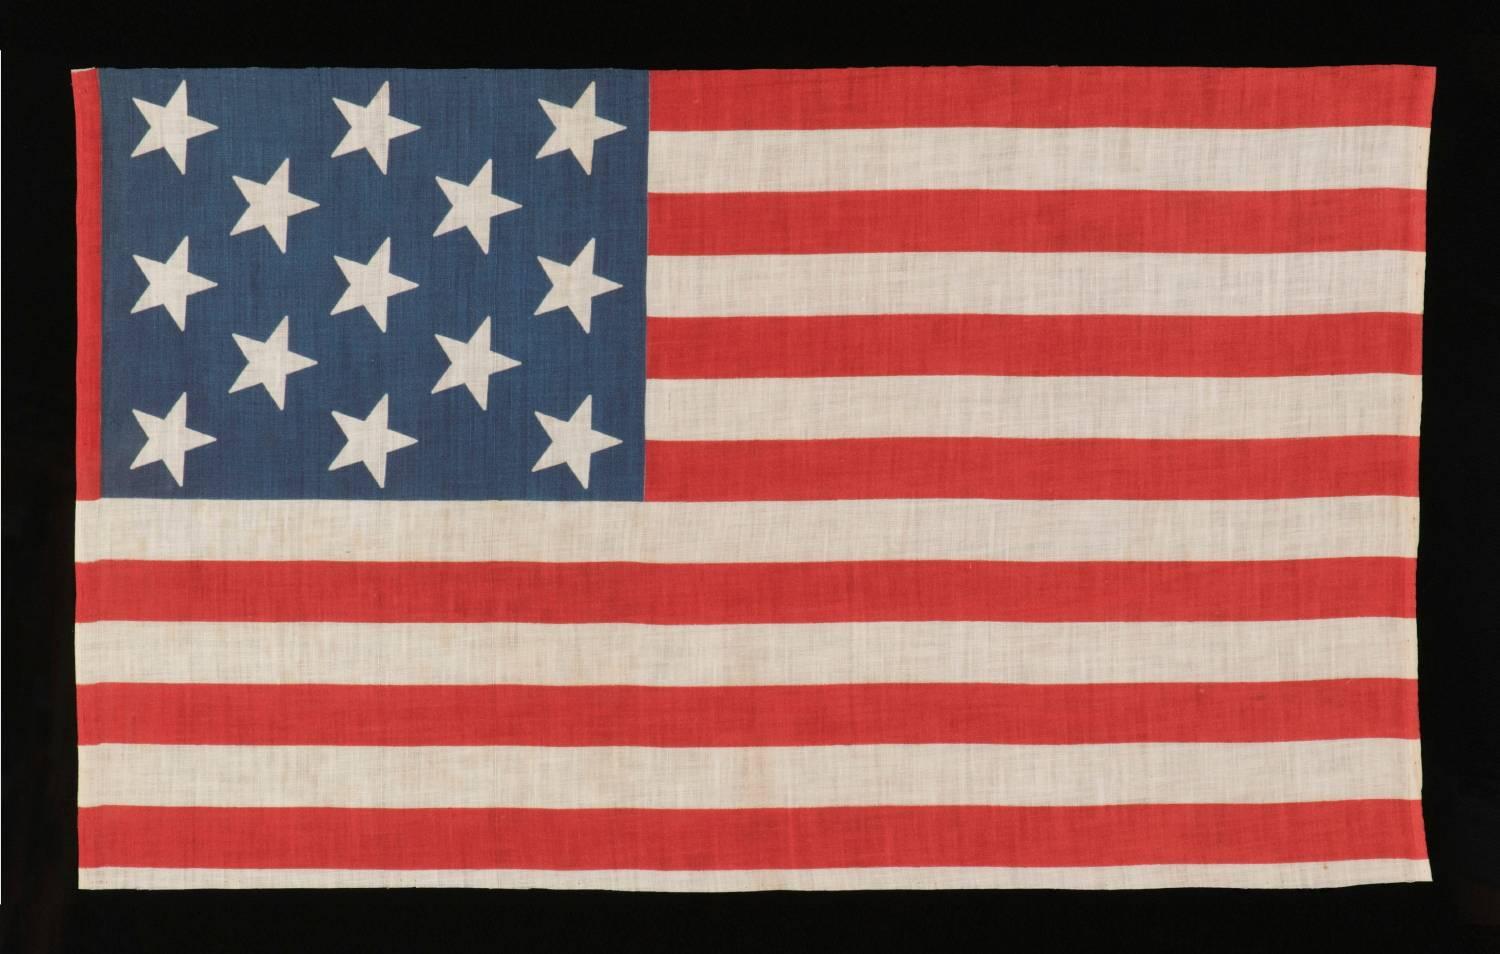 13 STAR PARADE FLAG IN A 3-2-3-2-3 PATTERN, MADE CA 1876-1898, UNUSUALLY LARGE AND WITH AN UNUSUAL STAR PATTERN AMONG ITS COUNTERPARTS OF THE 19TH CENTURY: 

13 star American national parade flag, printed on cotton, made sometime in the period